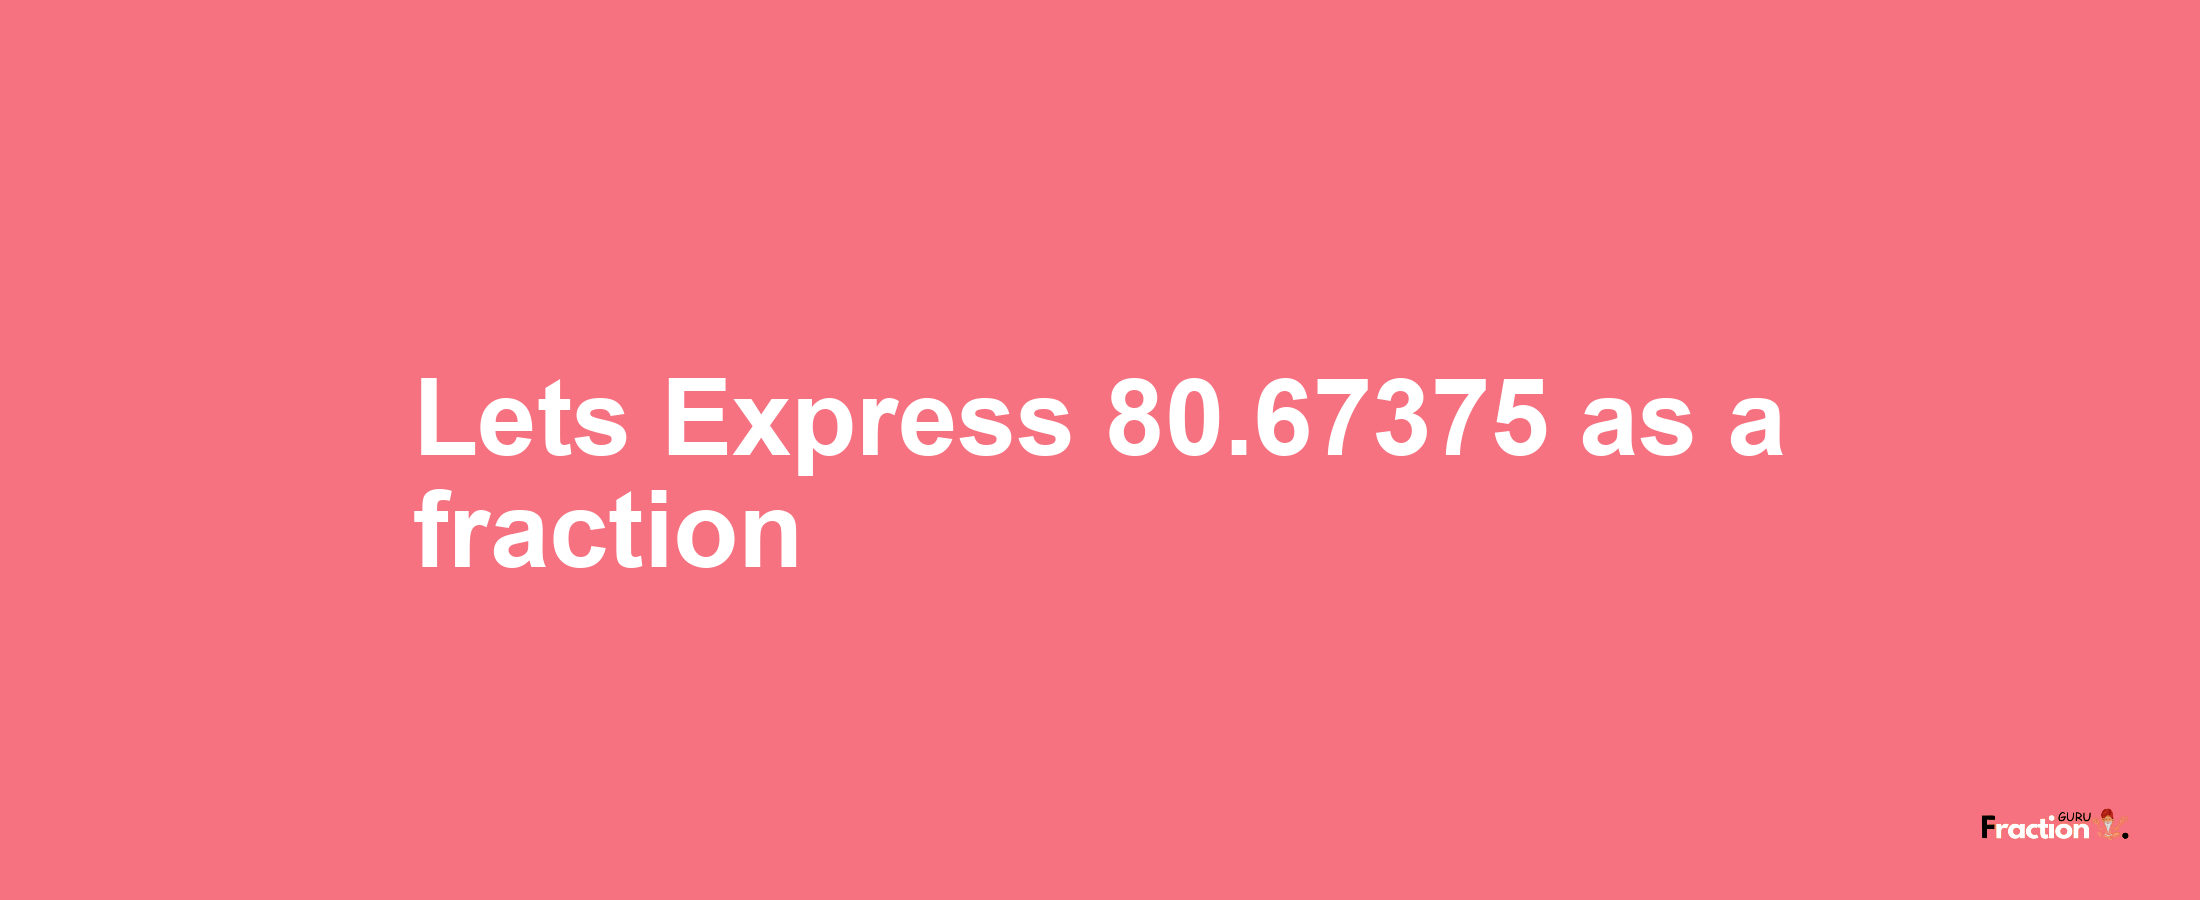 Lets Express 80.67375 as afraction